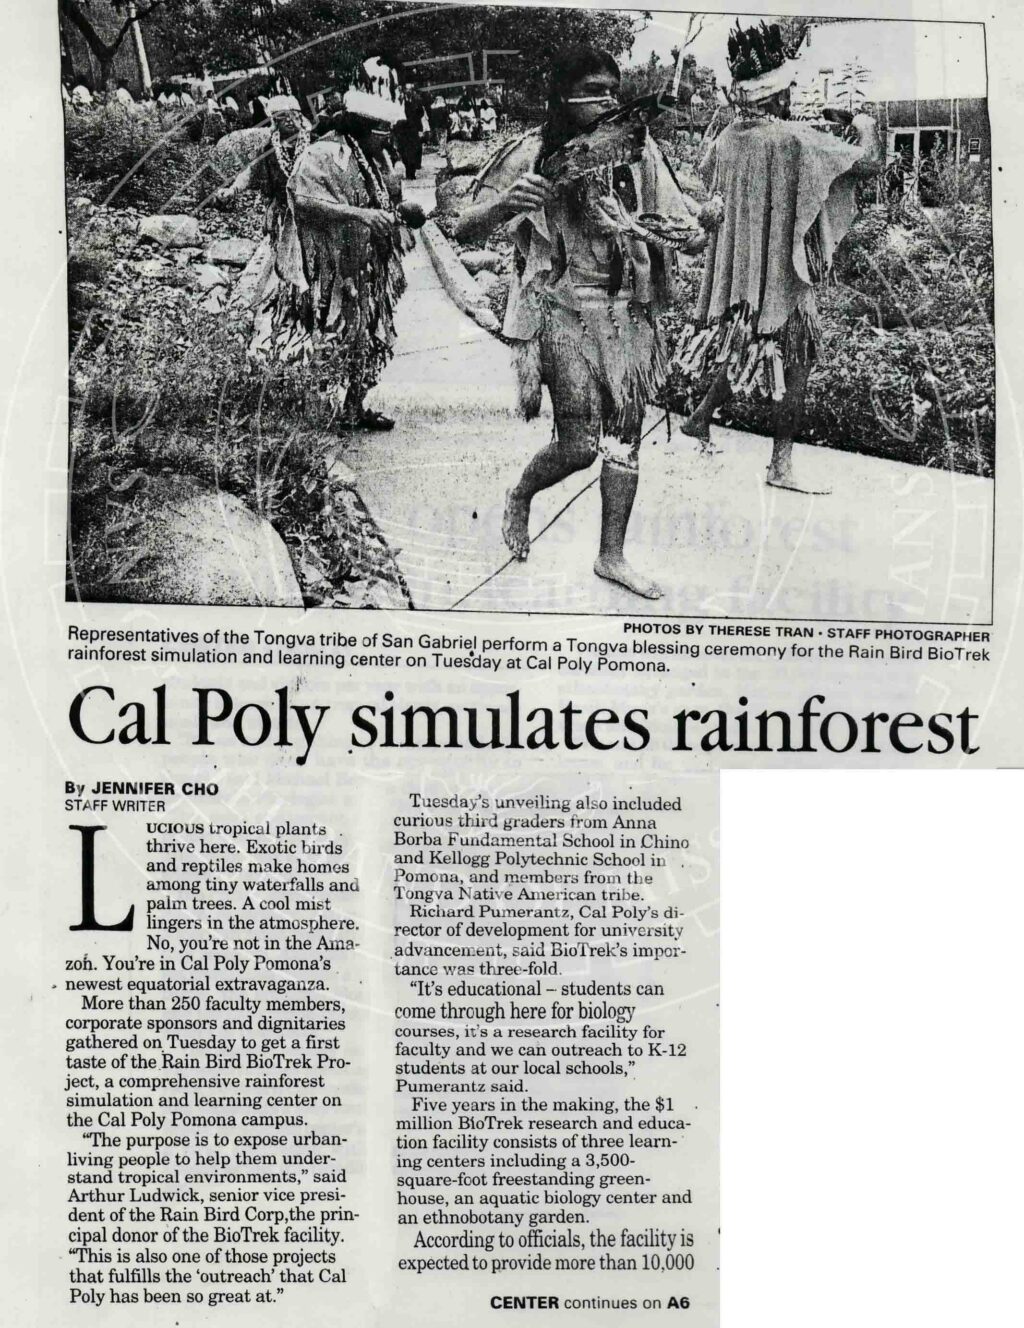 Facsimile of newspaper article entitled "Cal Poly simulates rainforest." Image shows dancers in traditional regalia with headdresses and feathered fans on a walkway.